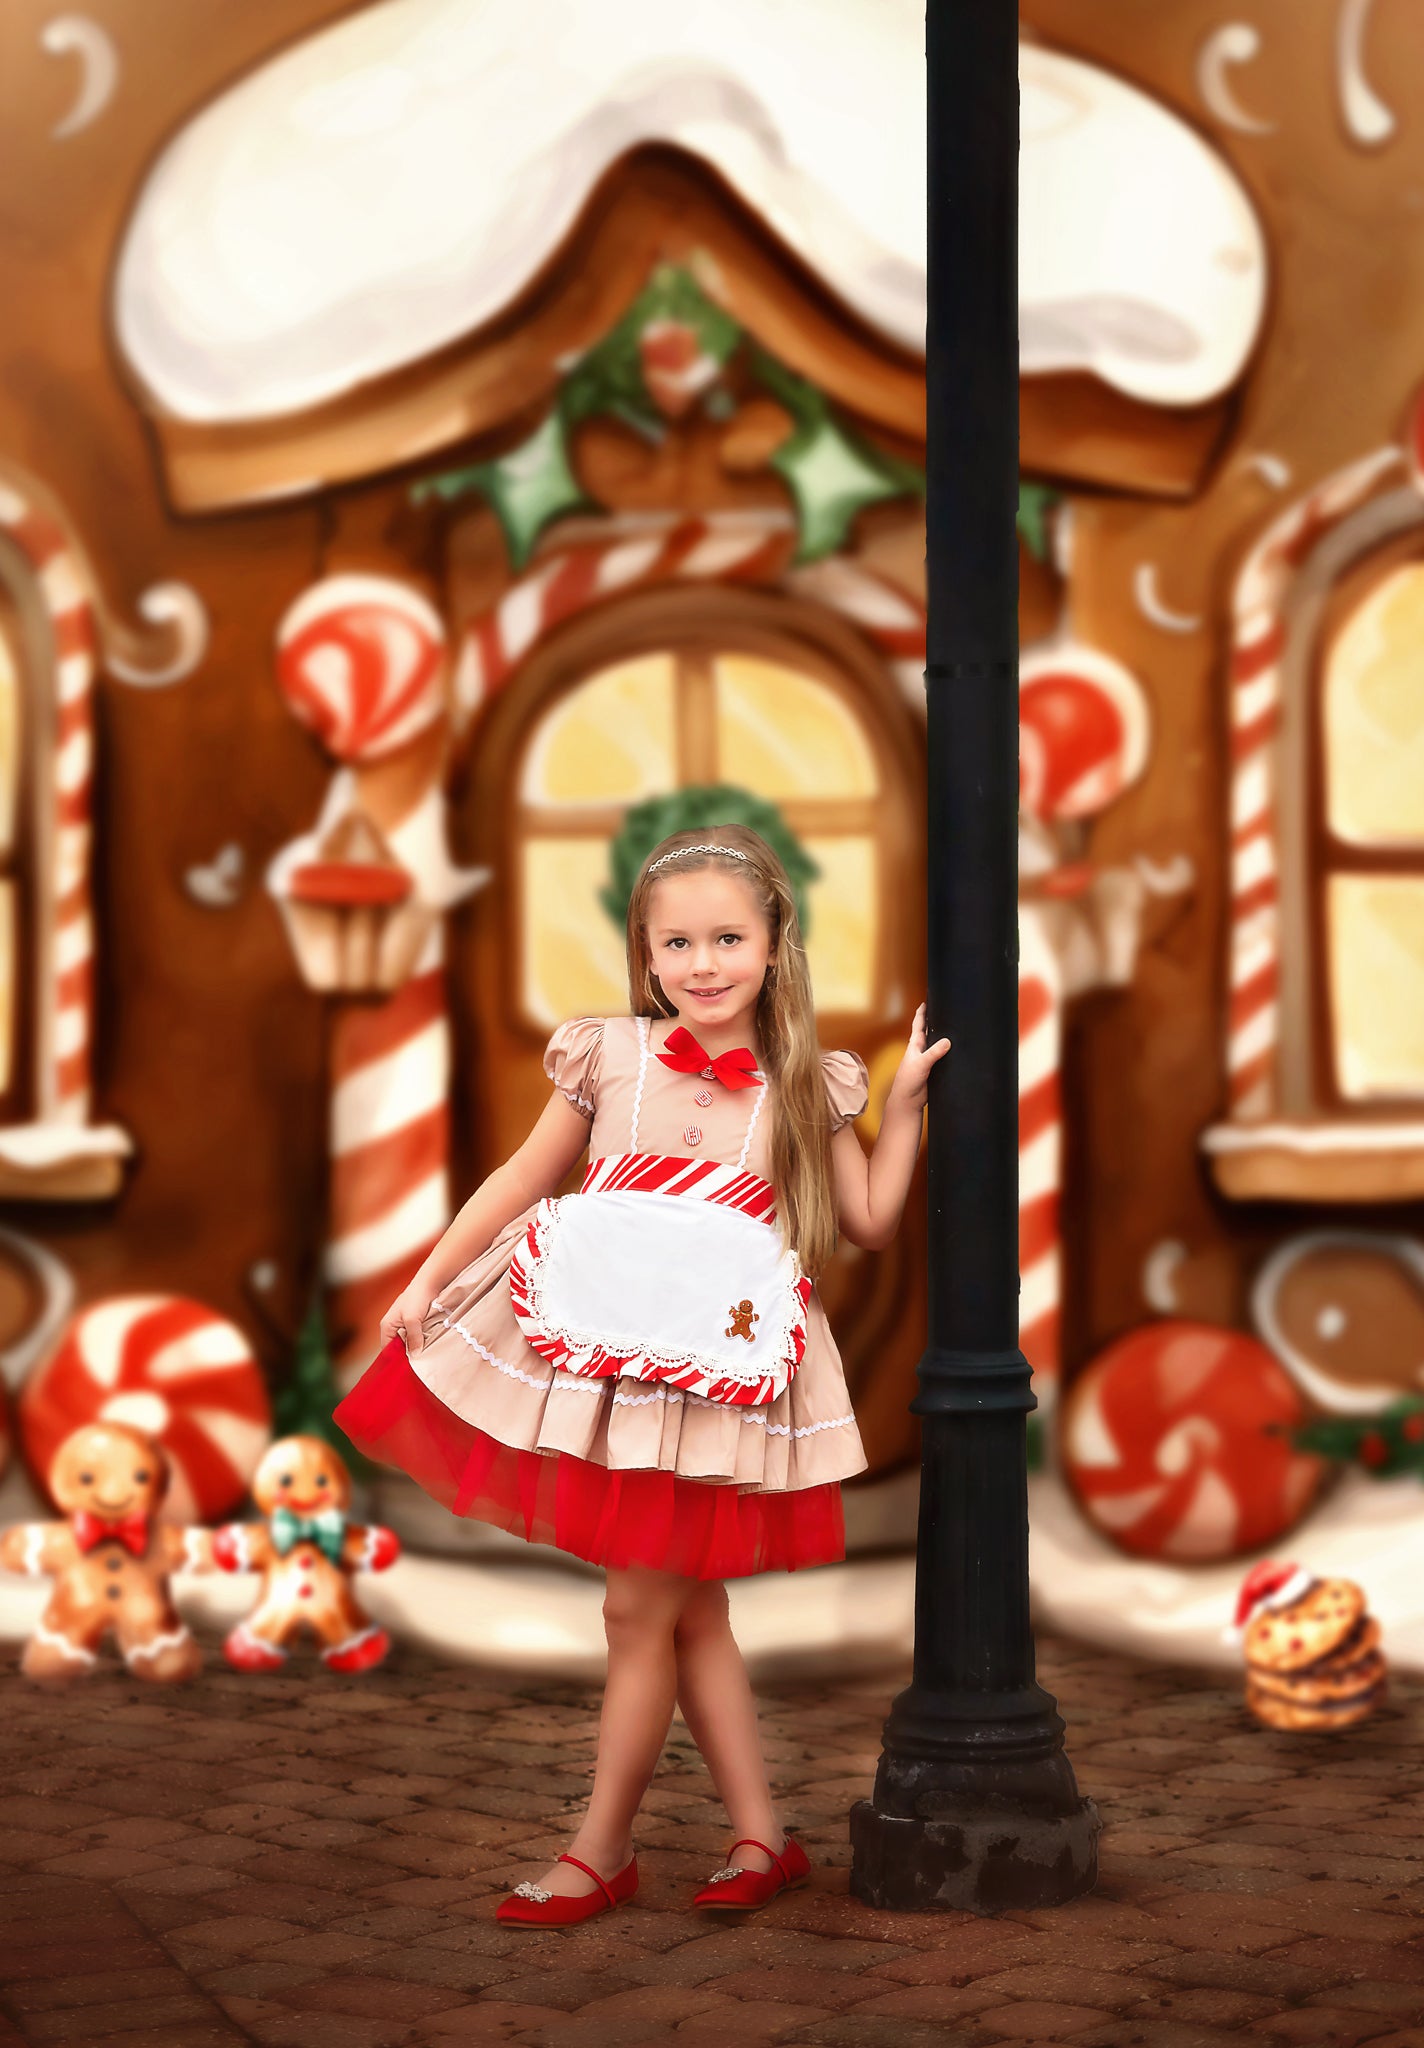 THE GINGERBREAD GIRL